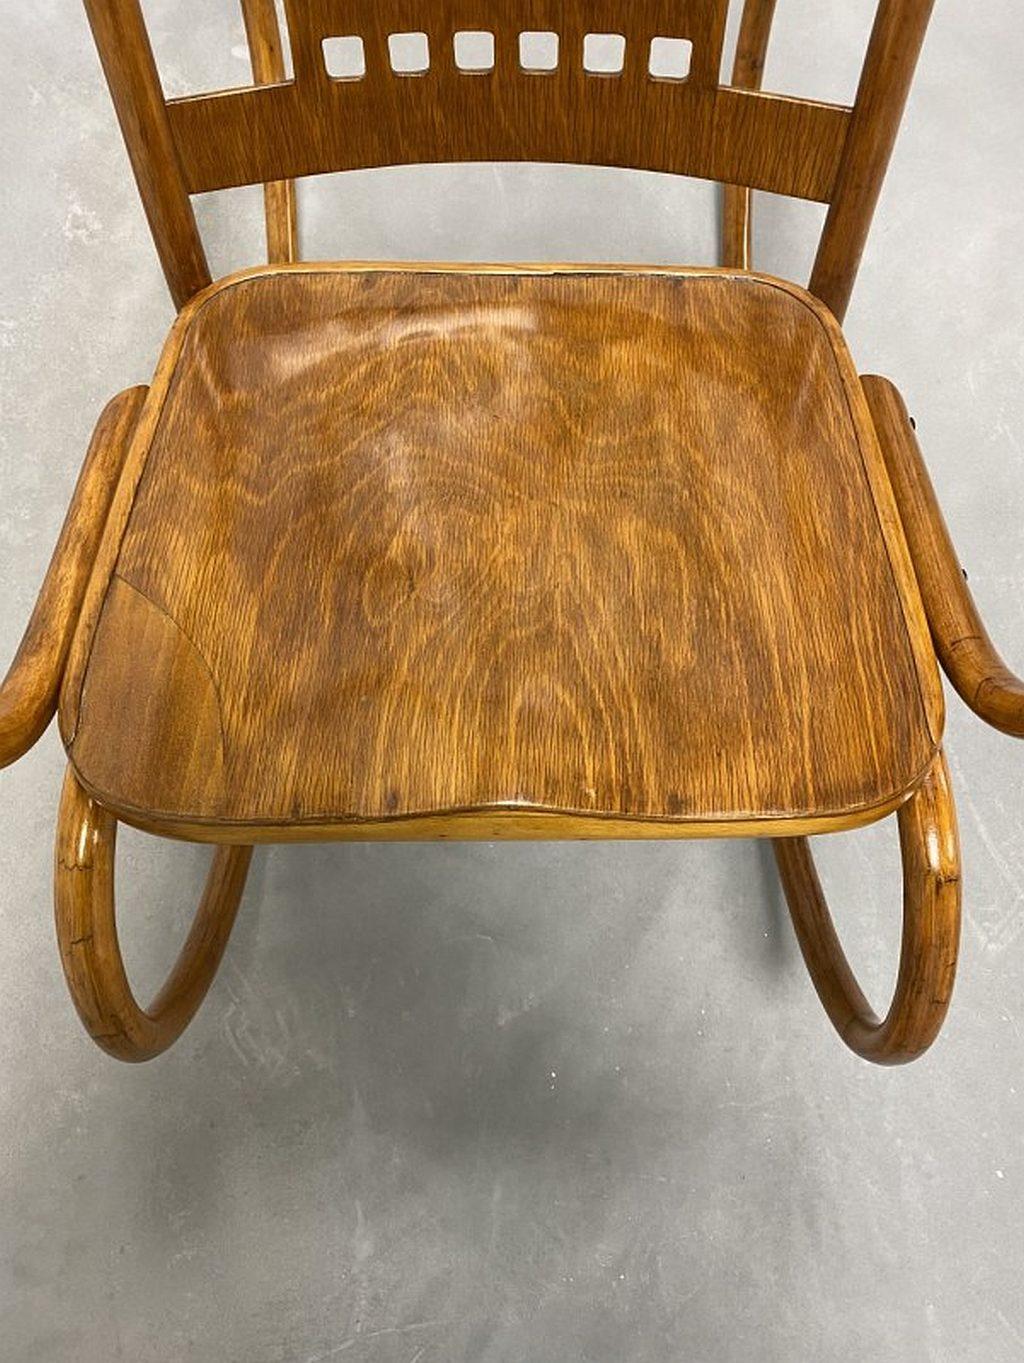 Early 20th Century Rocking Chair No.813 by Koloman Moser for J.J.Kohn For Sale